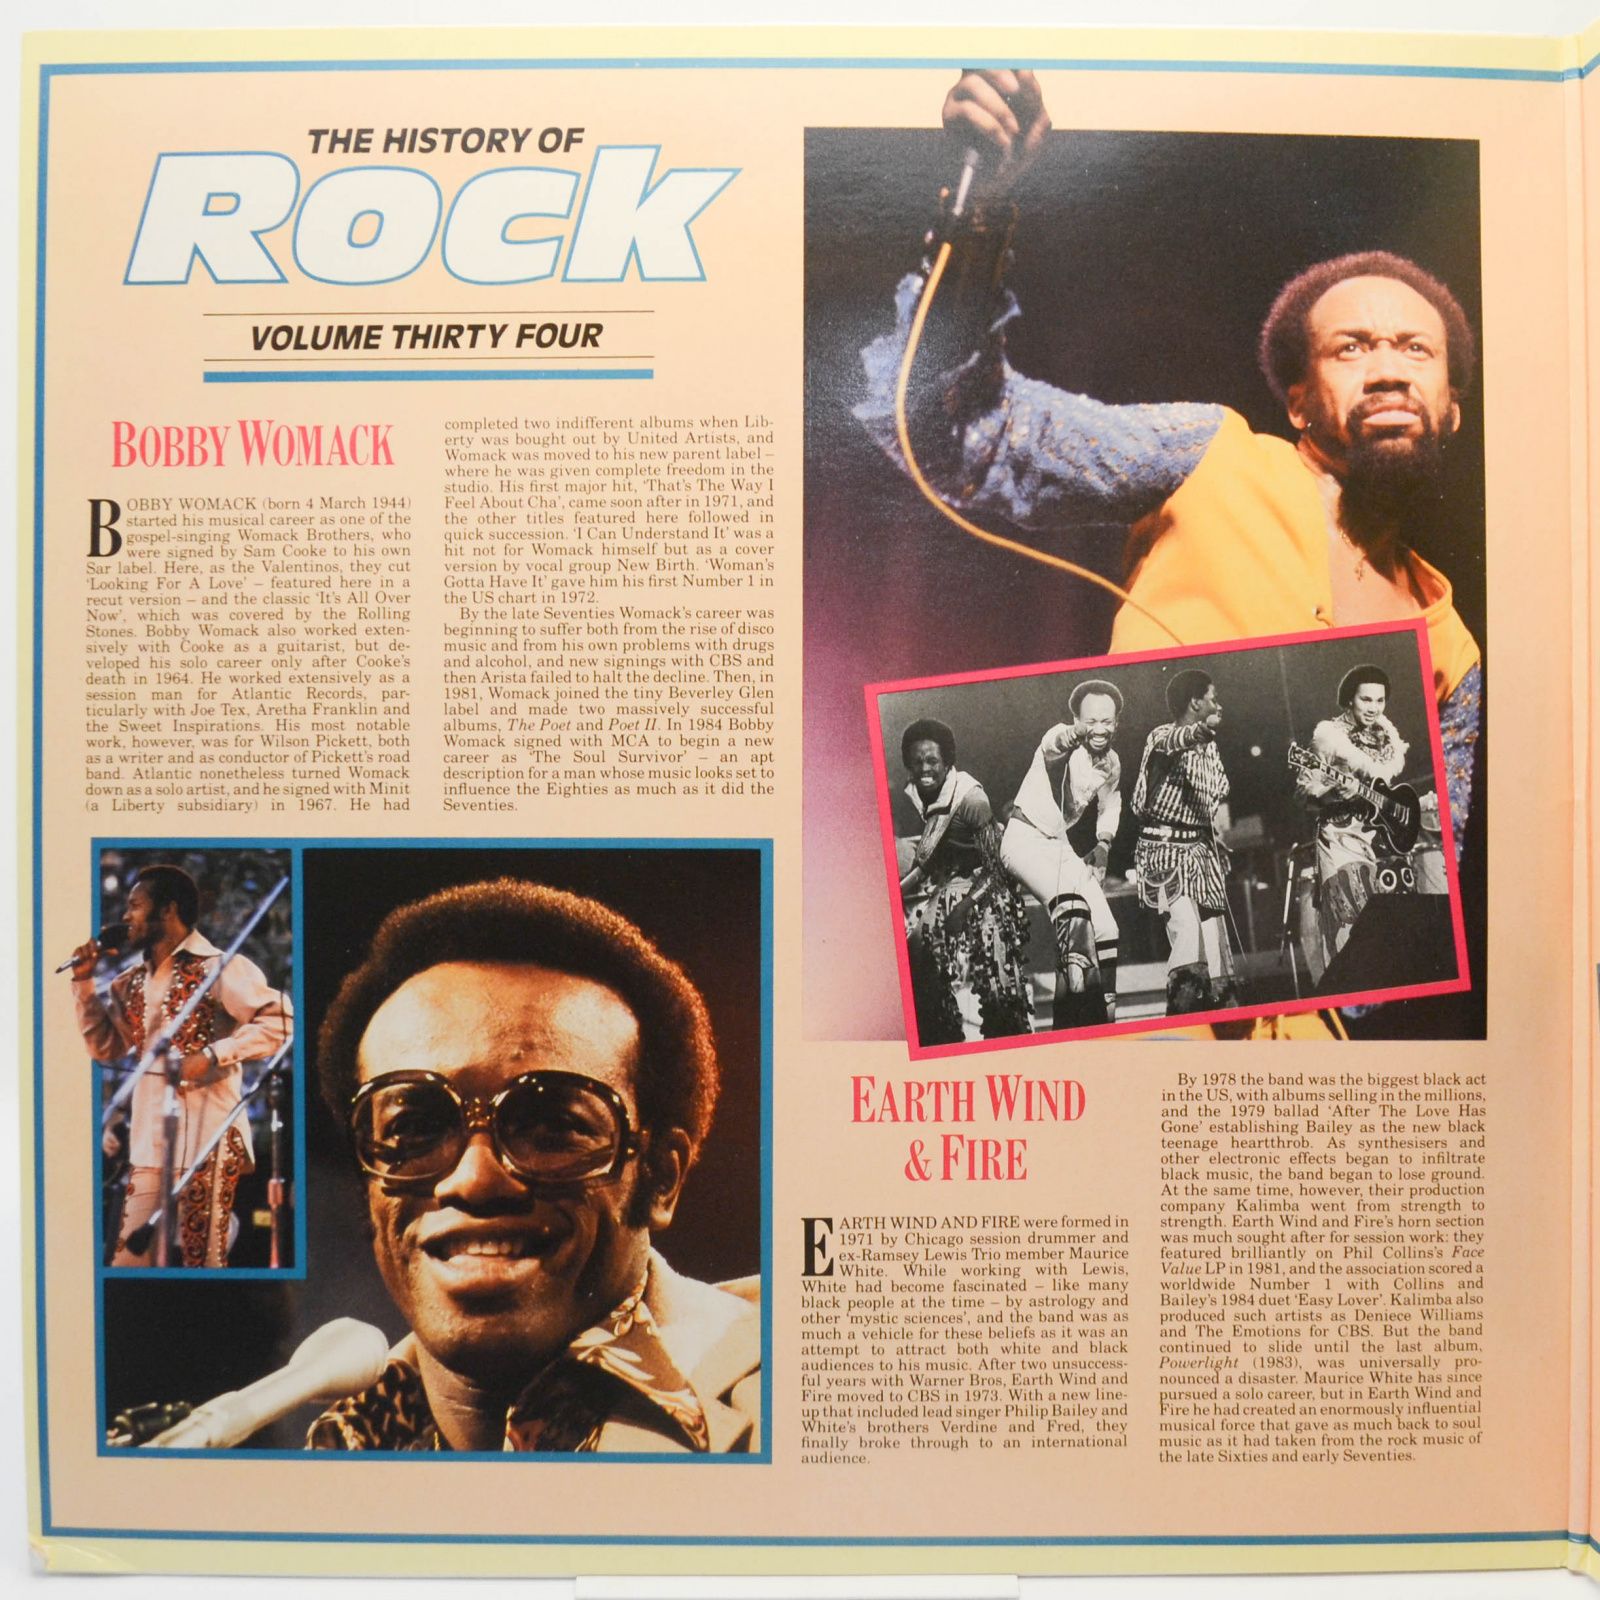 Bobby Womack / Earth Wind & Fire / The Isley Brothers / The O'Jays / Harold Melvin & The Bluenotes — The History Of Rock (Volume Thirty Four) (2LP, UK), 1986